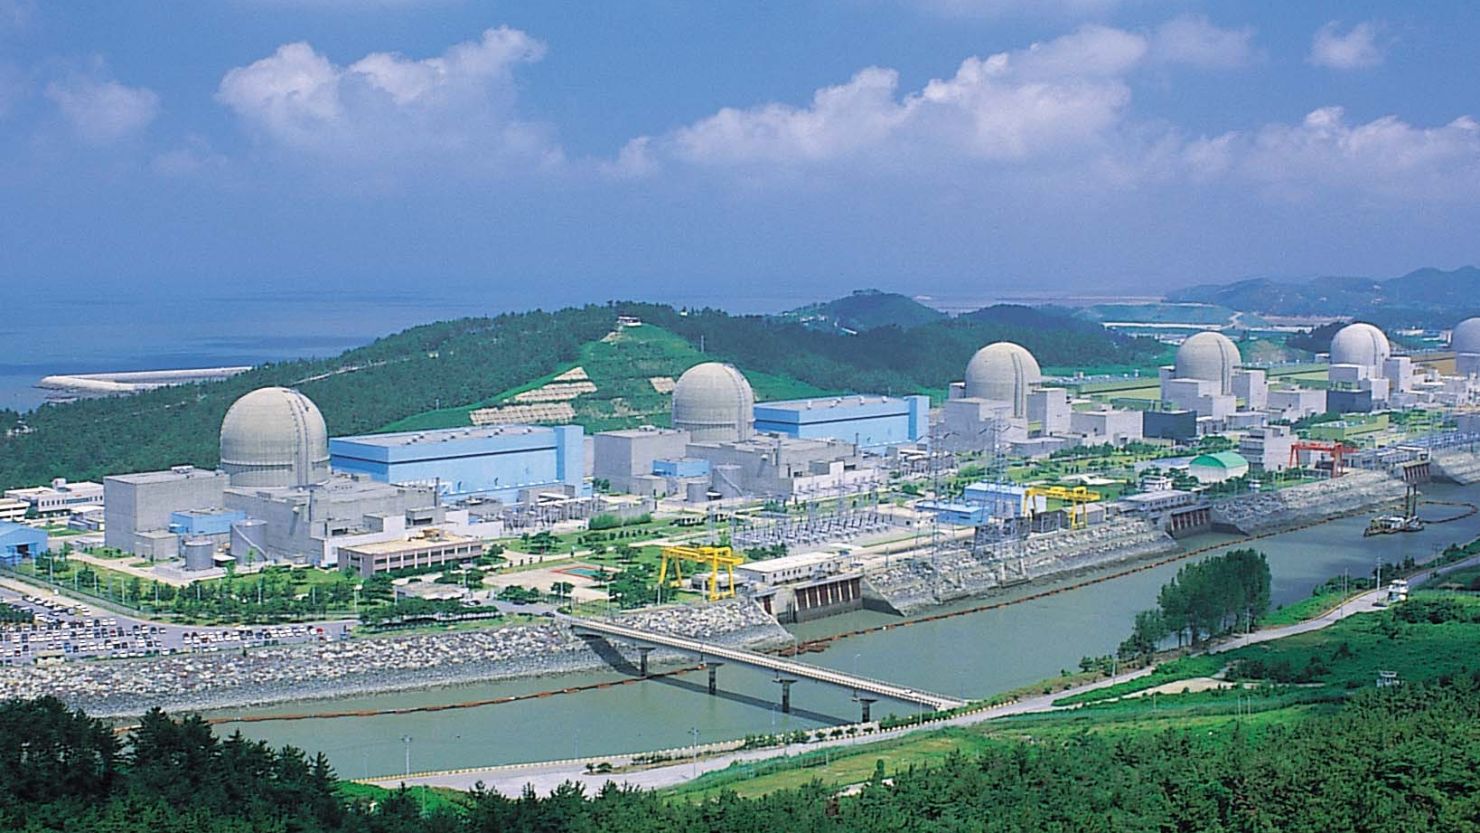 Authorities said microscopic cracks were found in control rods in one reactor at the Yonggwang nuclear plant.